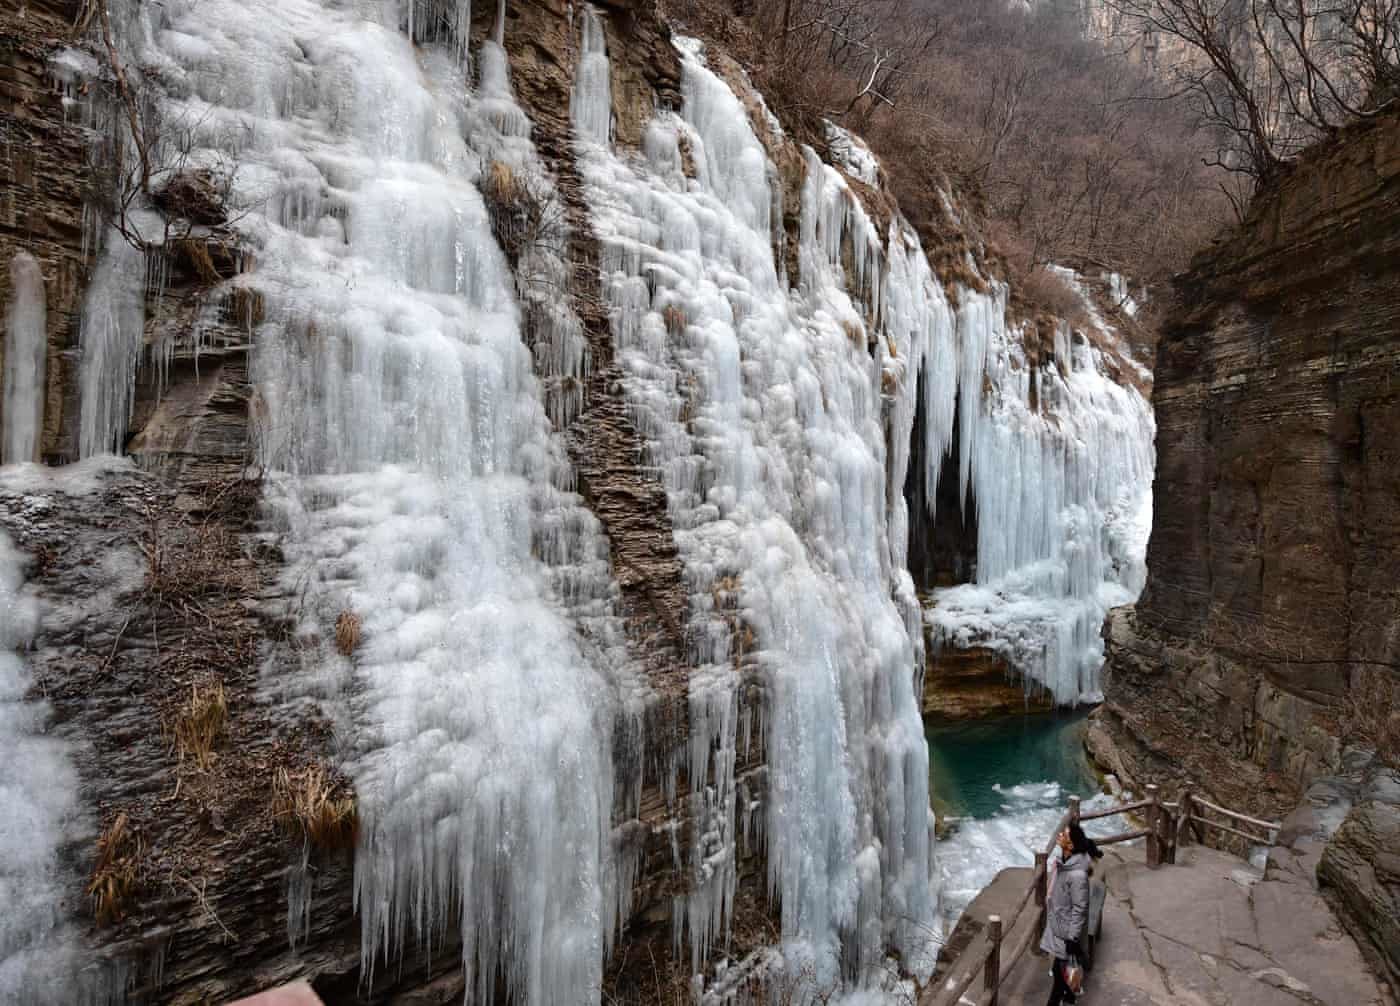 A tourist enjoying the scenery of icefall at Yuntai Mountain scenic spot in Jiaozuo, central China’s Henan Province